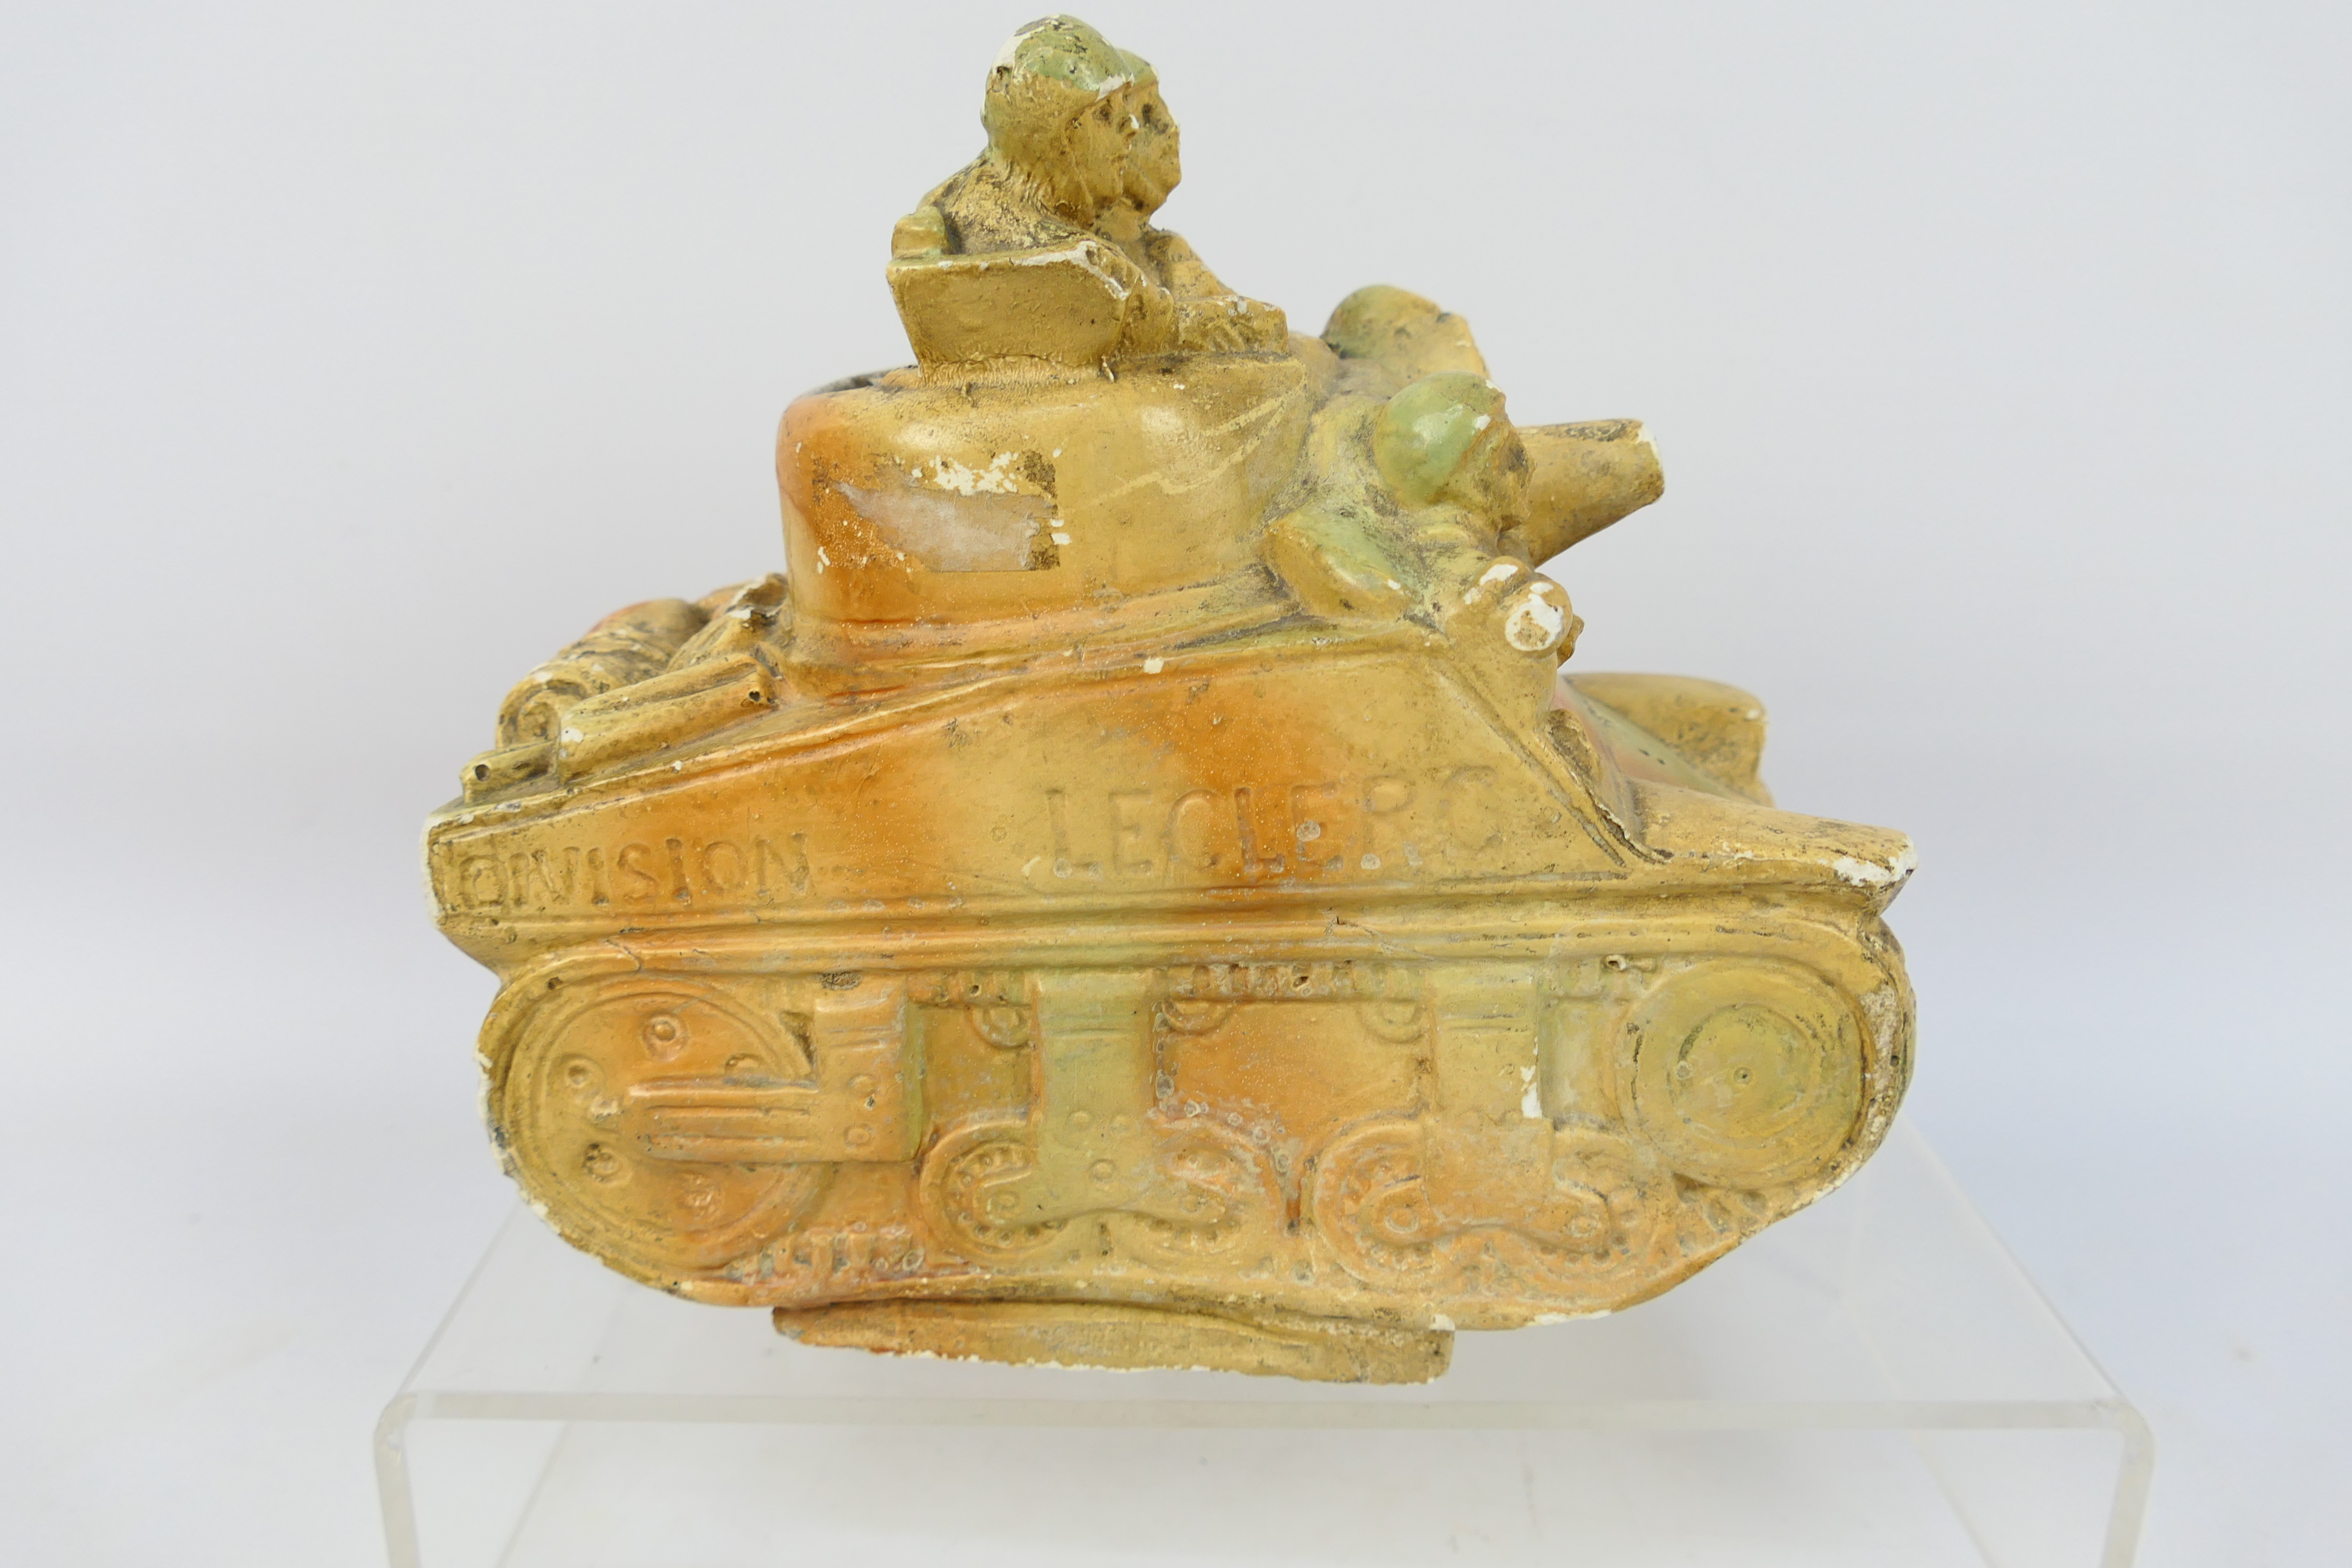 A ceramic model depicting a stylised French tank, - Image 3 of 6